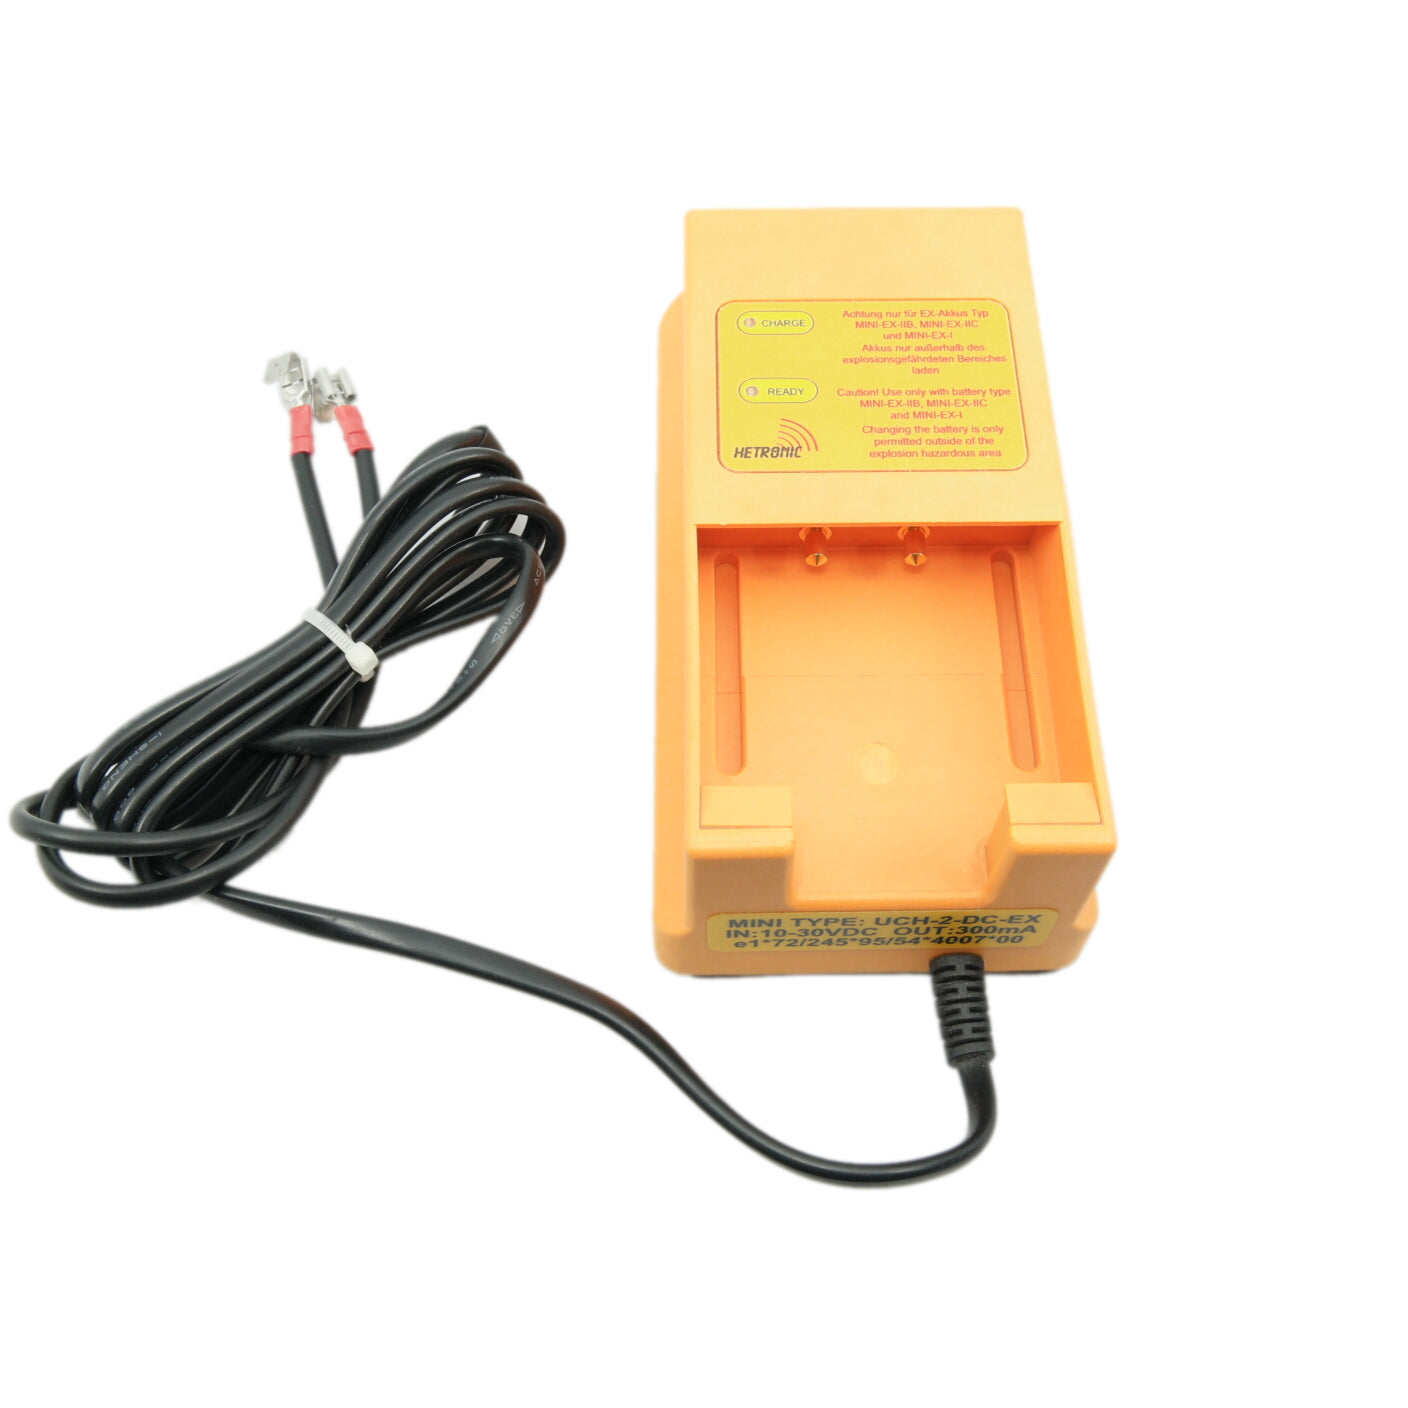 68109520 : Hetronic Charger Mini UCH-2-AC-EX